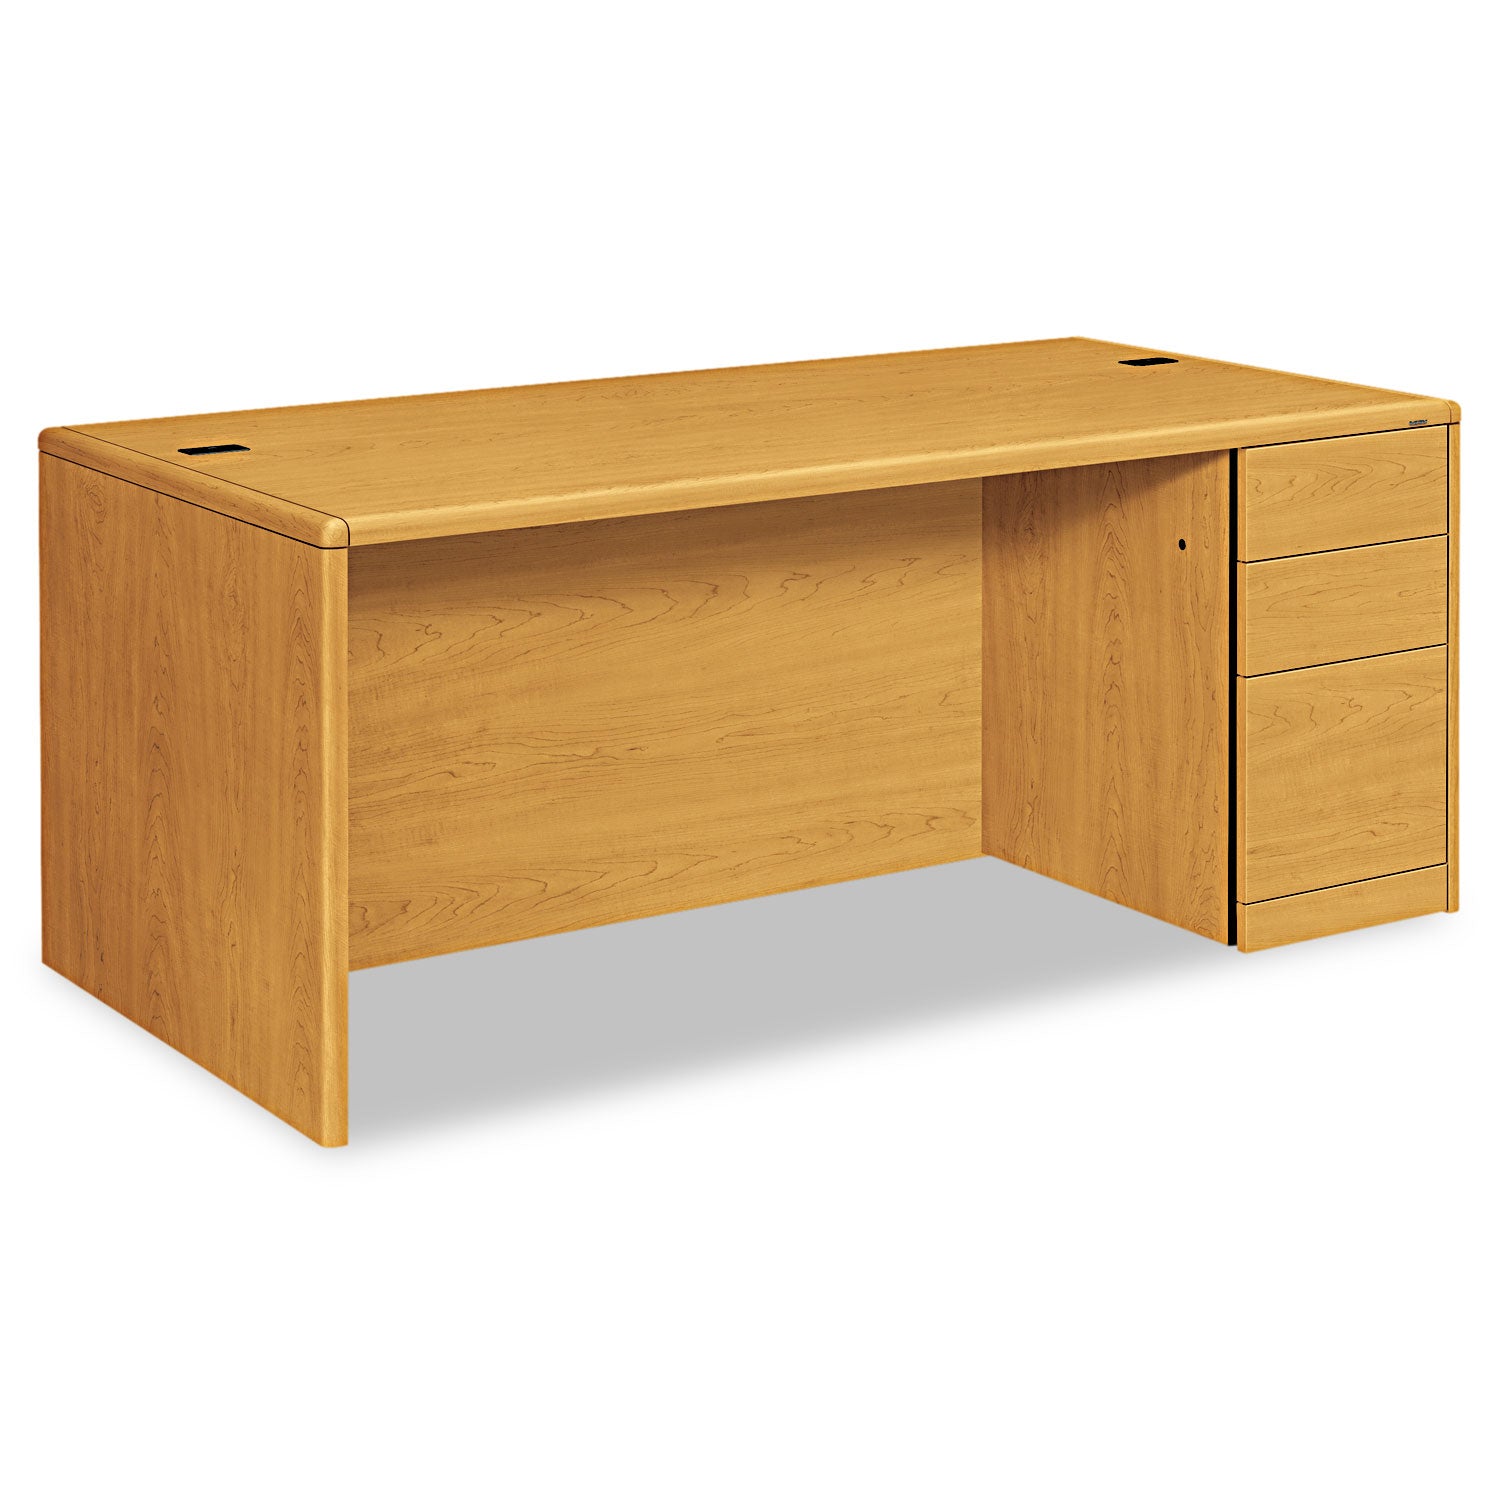 10700 Series Single Pedestal Desk with Full-Height Pedestal on Right, 72" x 36" x 29.5", Harvest - 